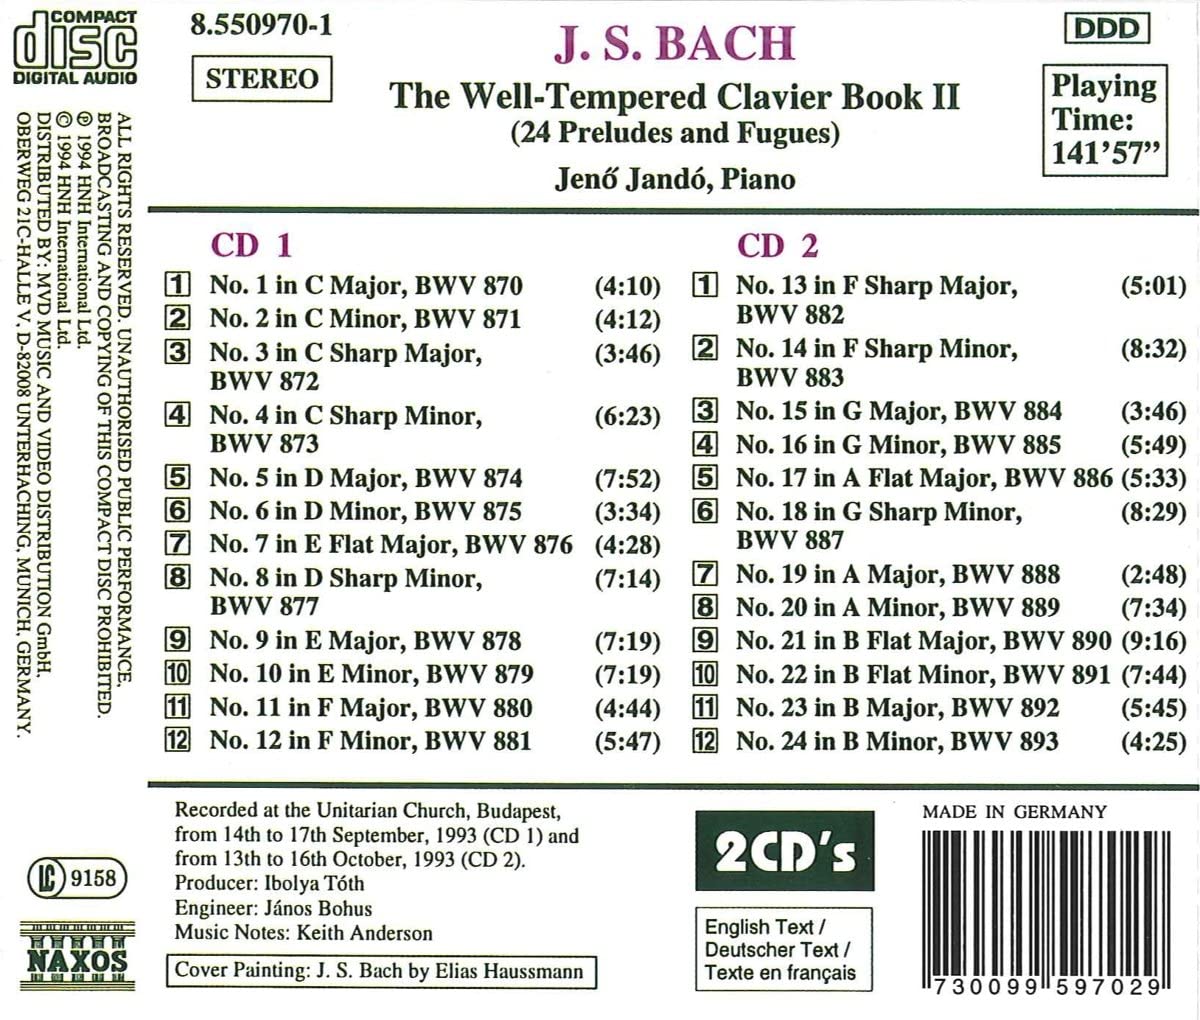 BACH: The Well-Tempered Clavier, Book 2 - slide-1